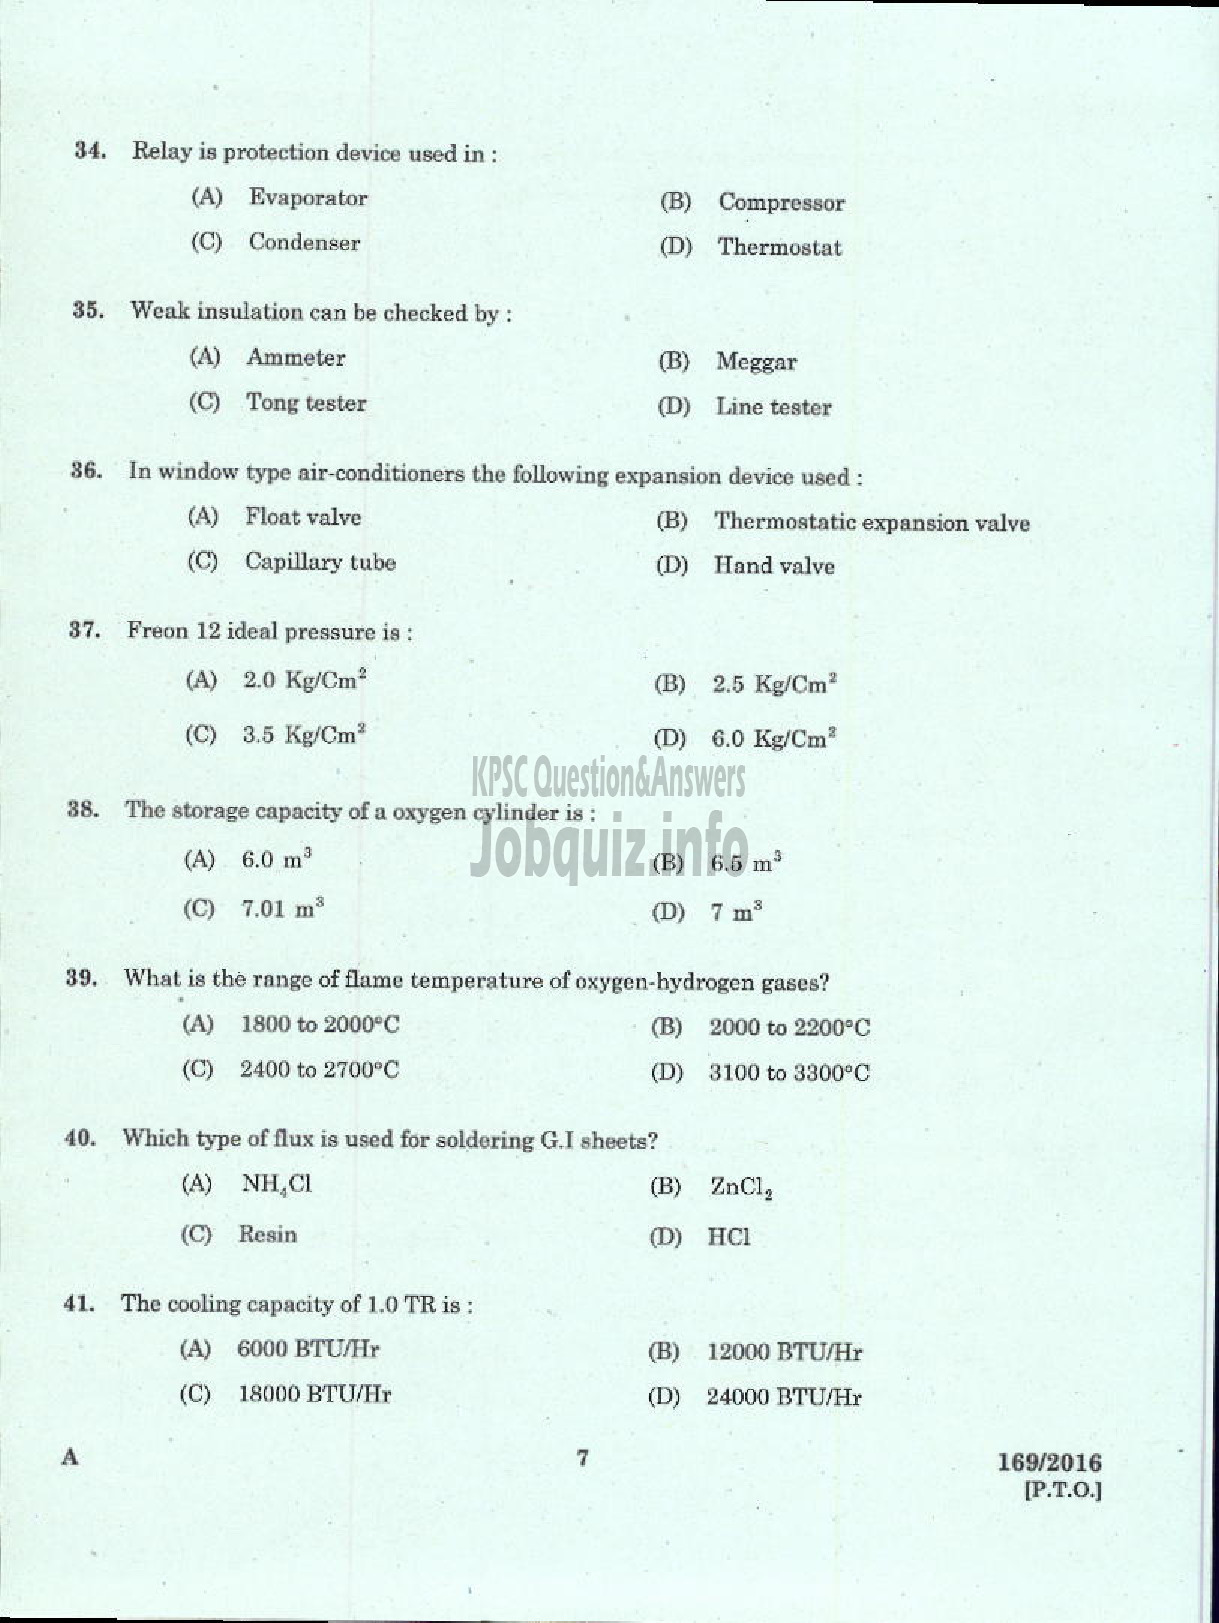 Kerala PSC Question Paper - TRADESMAN REFRIGERATION AND AIR CONDITIONING TECHNICAL EDUCATION-5